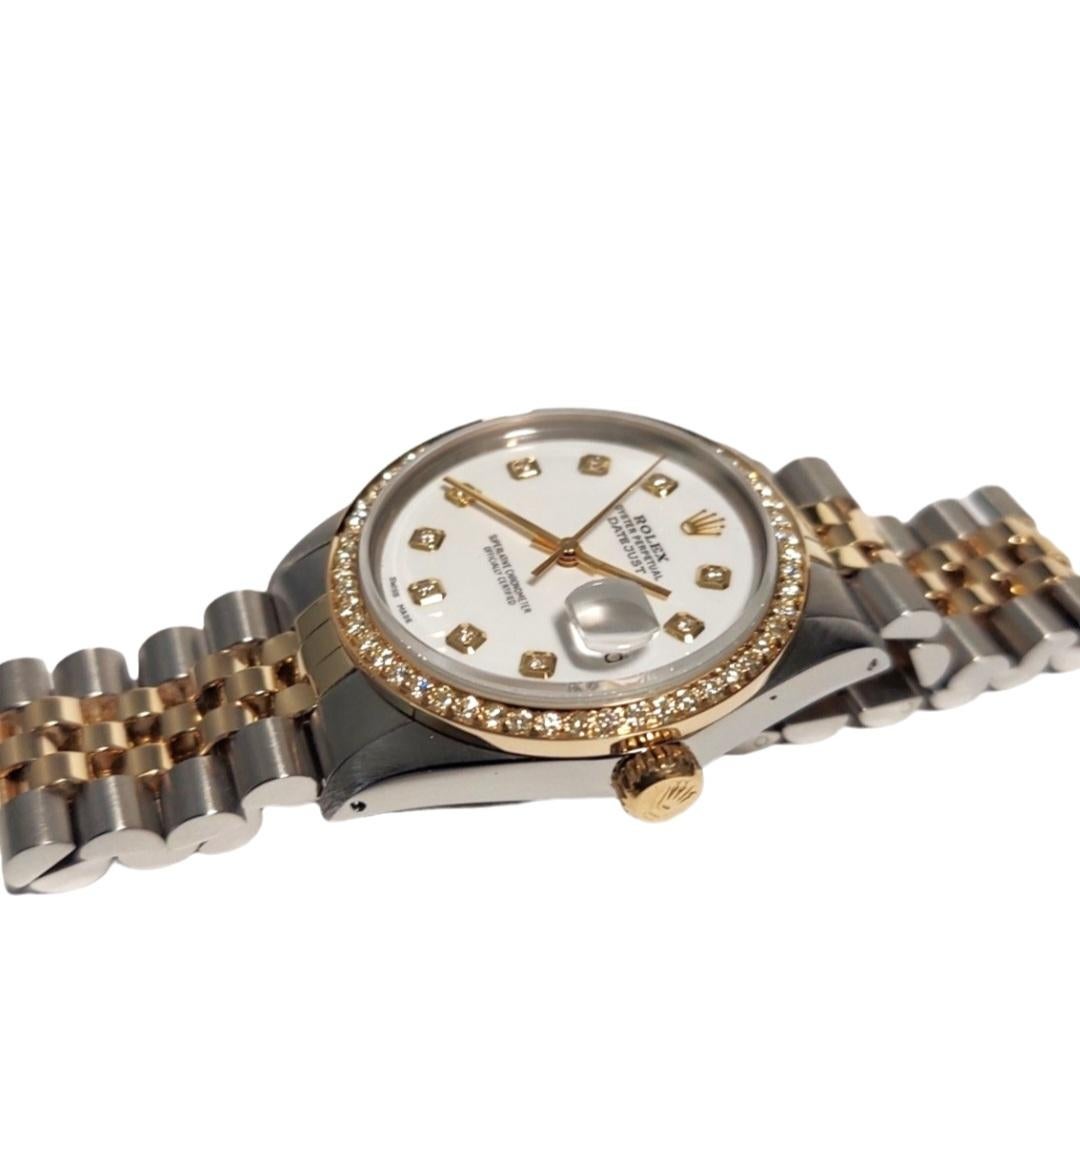 Brand - Rolex
Gender - Unisex
Style - Datejust
Model - 16013 
Metals - Yellow Gold/ Steel
Case size - 36mm
Dial - Custom White Dial
Bezel - Custom Yellow Gold Diamond
Crystal - Sapphire 
Movement - Auto Cal-3035
Band - Rolex Two-tone Jubilee